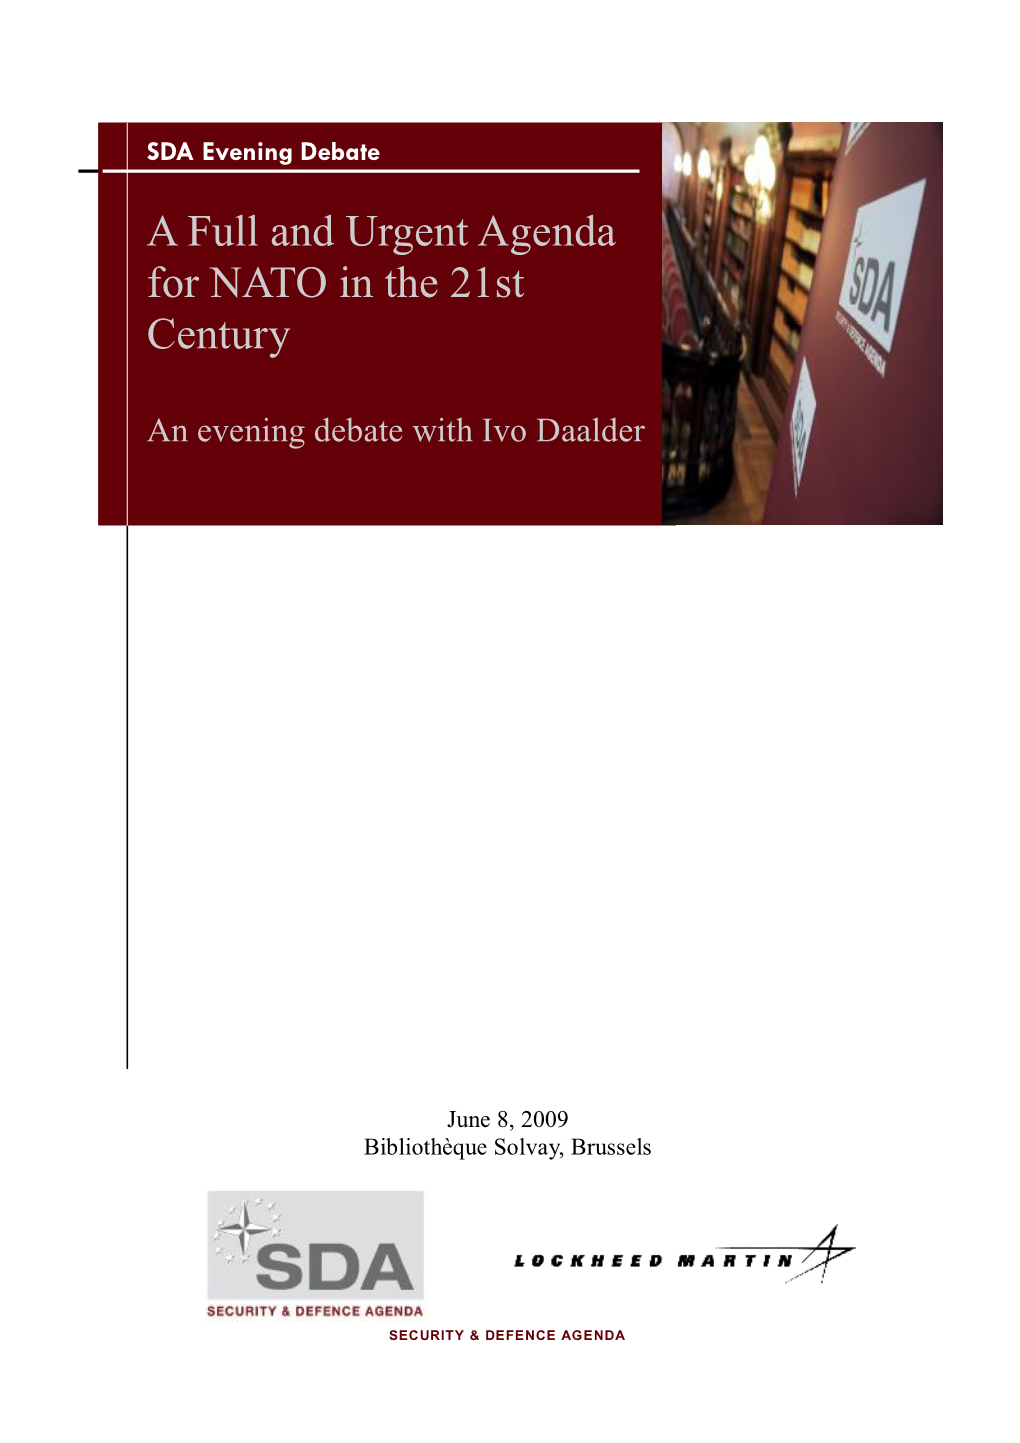 A Full and Urgent Agenda for NATO in the 21St Century